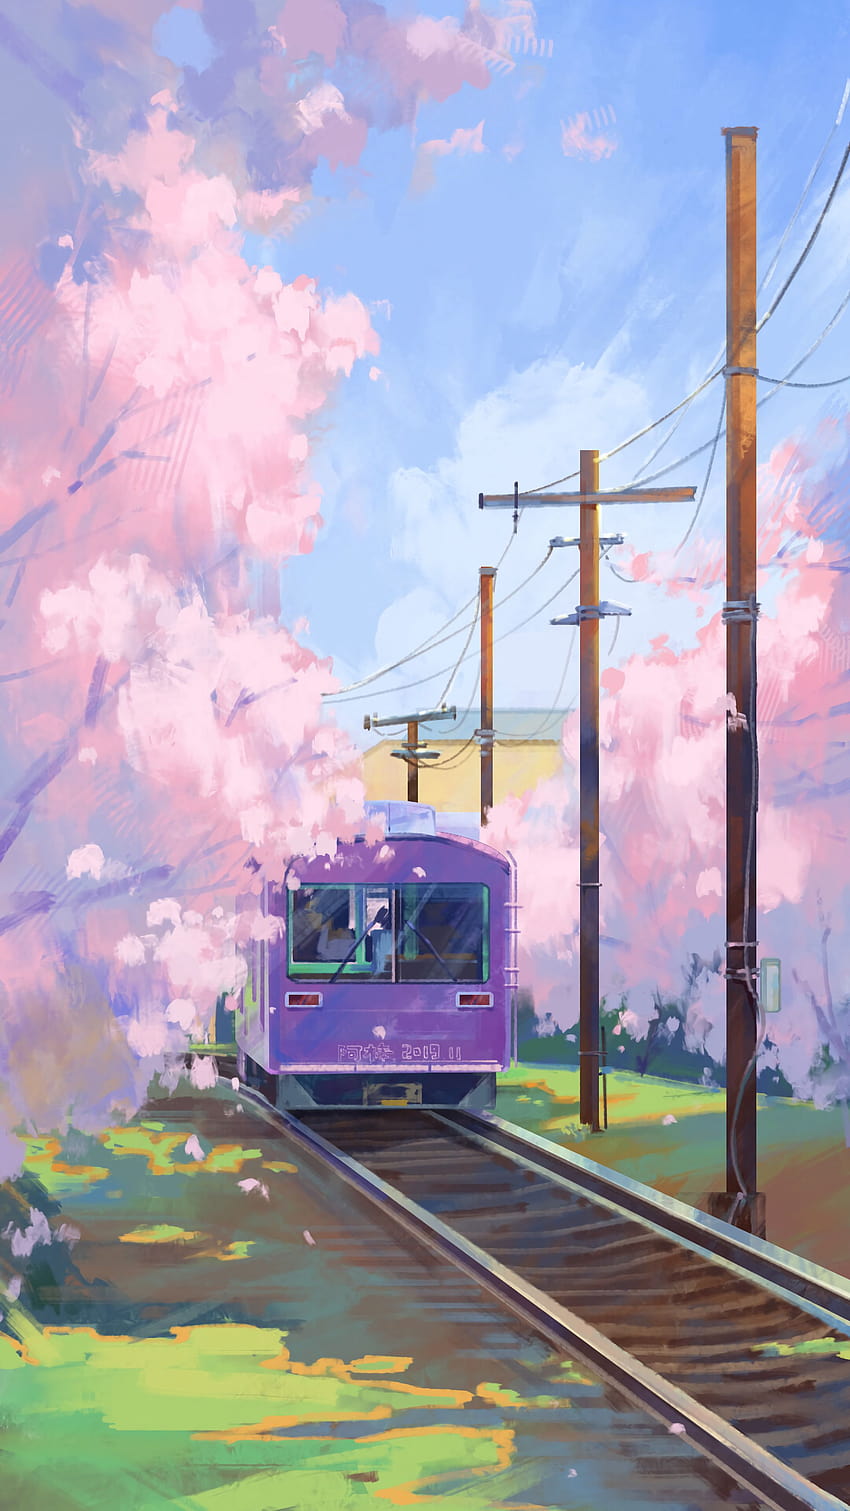 prompthunt: sideview of a anime train, illustration, autumn light,  colorful, beautiful, inspired by studio ghibli, inspired by hayao miyazaki,  concept art, manga, cute and adorable